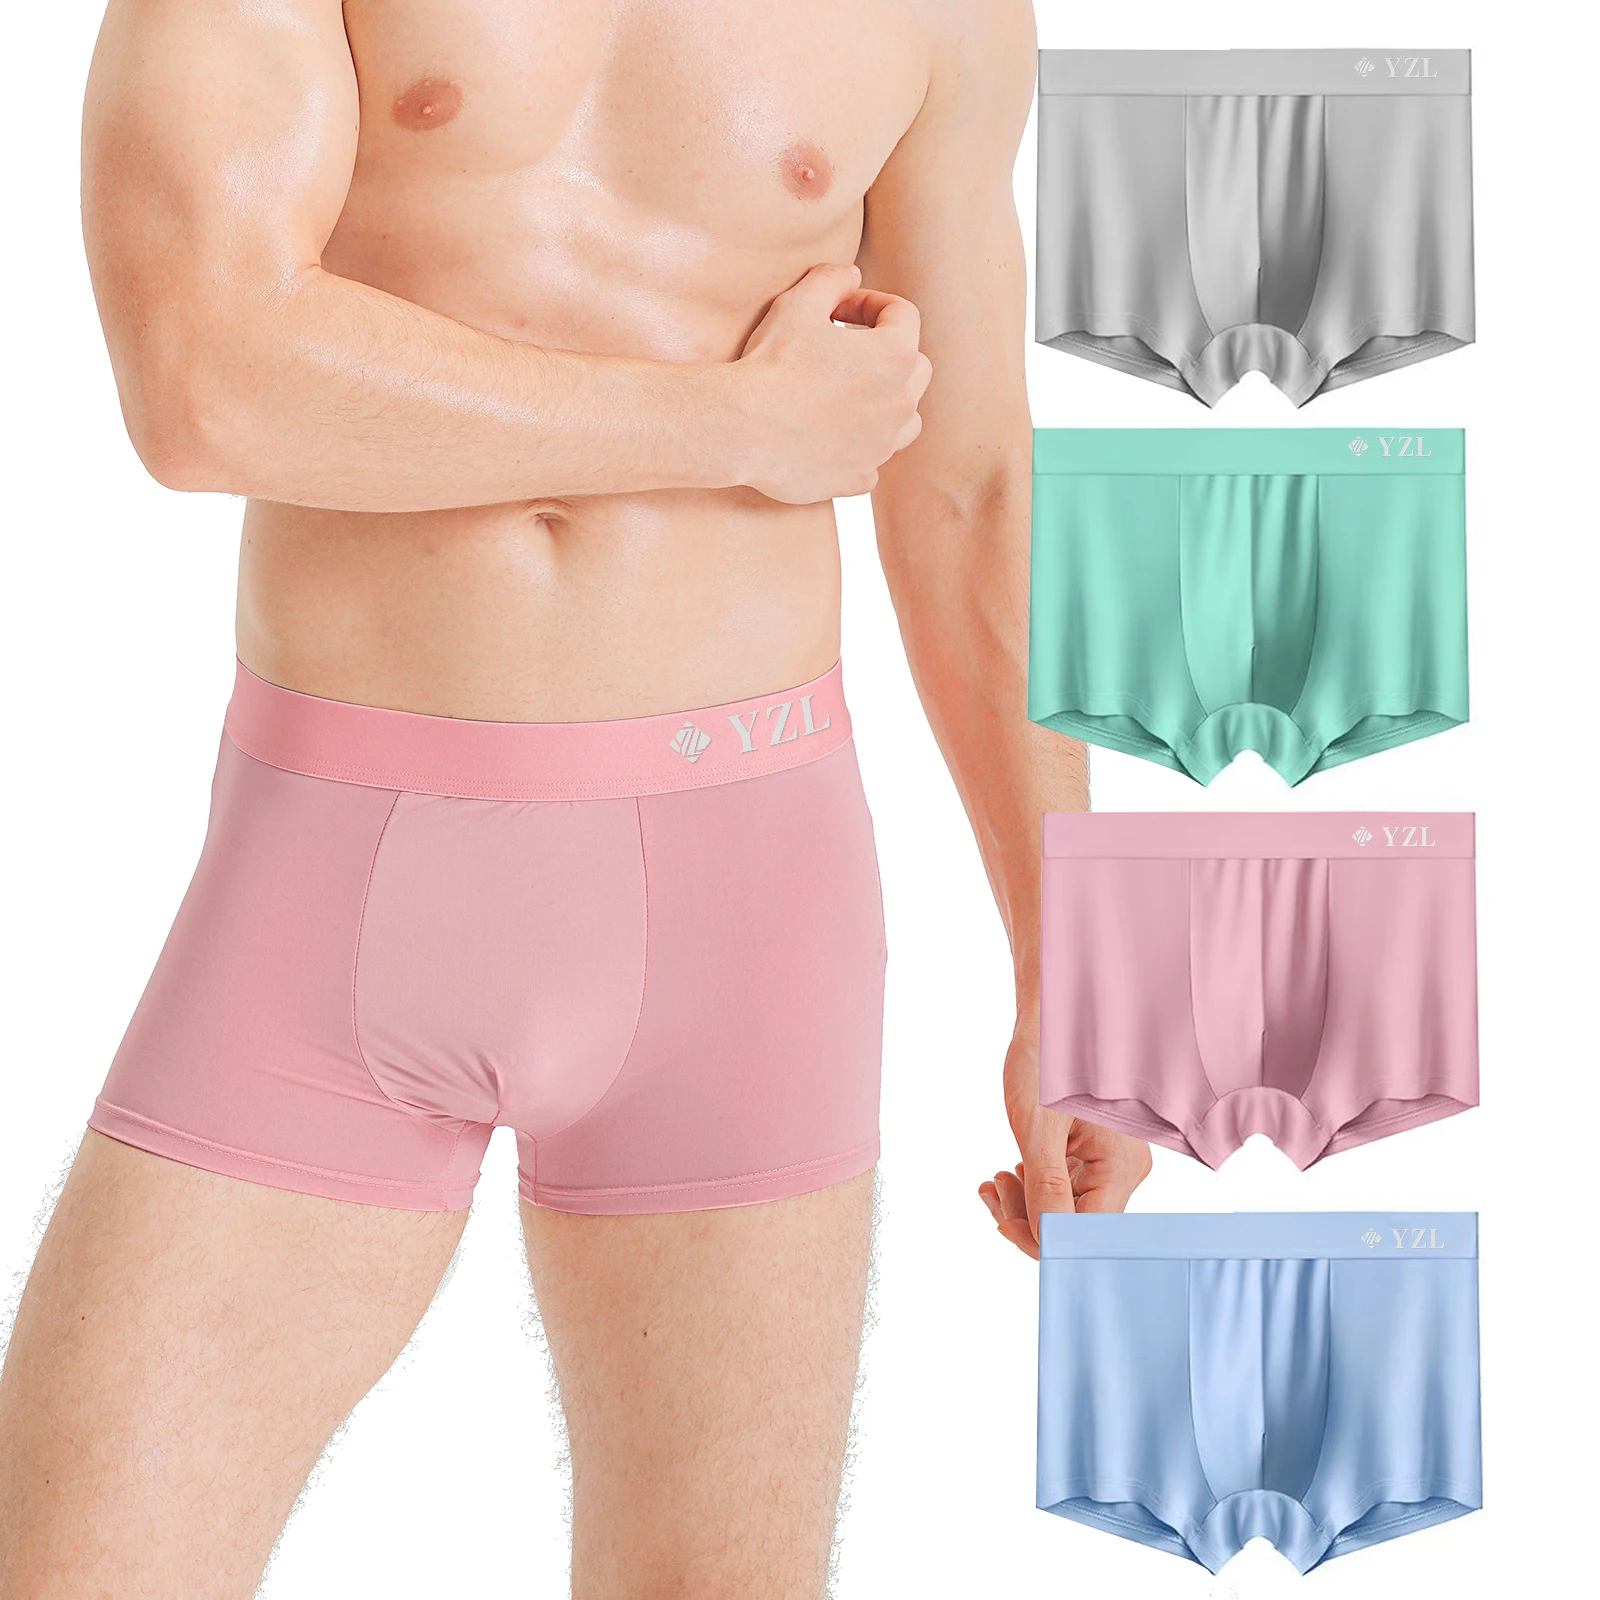 Men's Underwear ice Silk Flat Corner Shorts pants Summer Thin Antibacterial Modal Large Boys' Seamless Top Quality with Gift Box smartmi toilet seat lid cover 2rro induction version with nightlight uv antibacterial six speed seat temperature adjustment